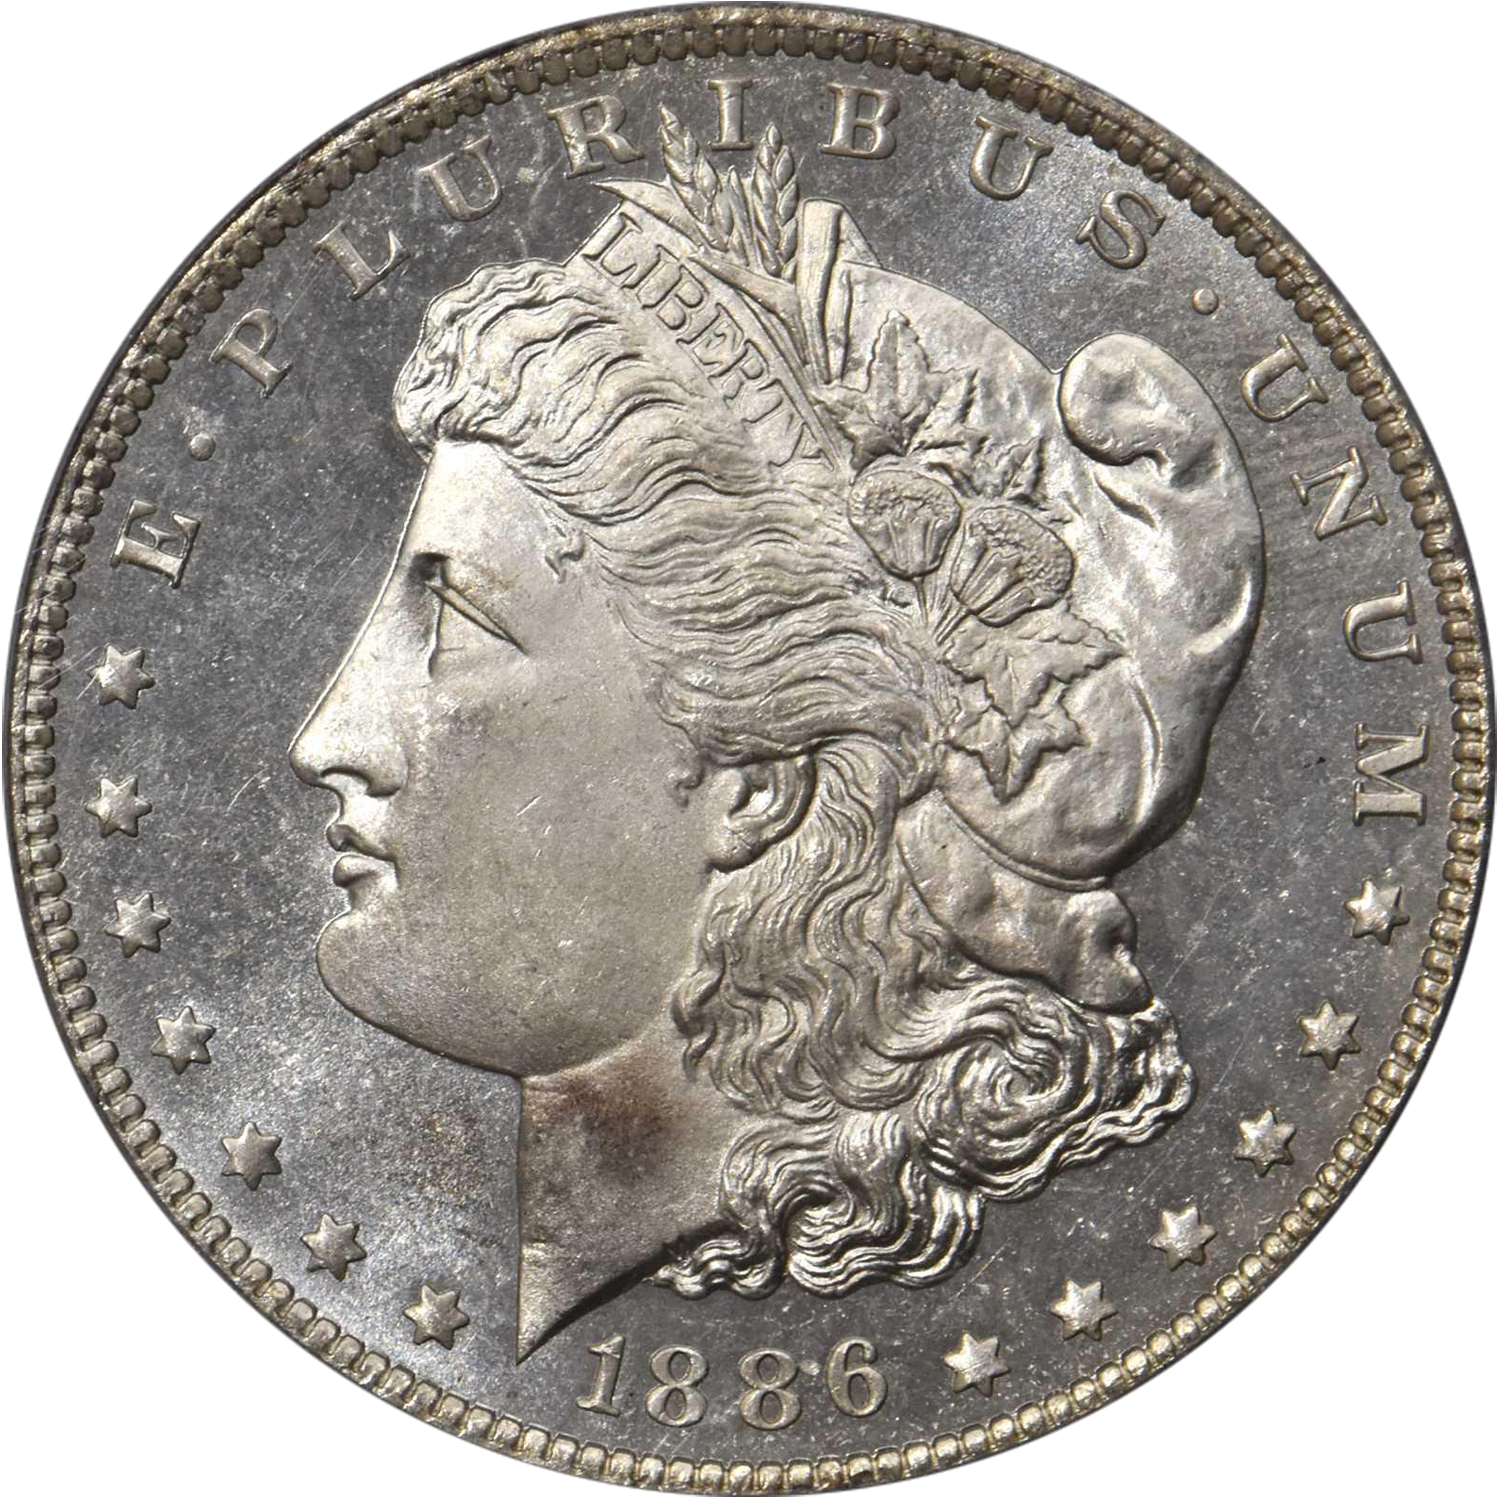 finest known 1886 new orleans morgan silver dollar